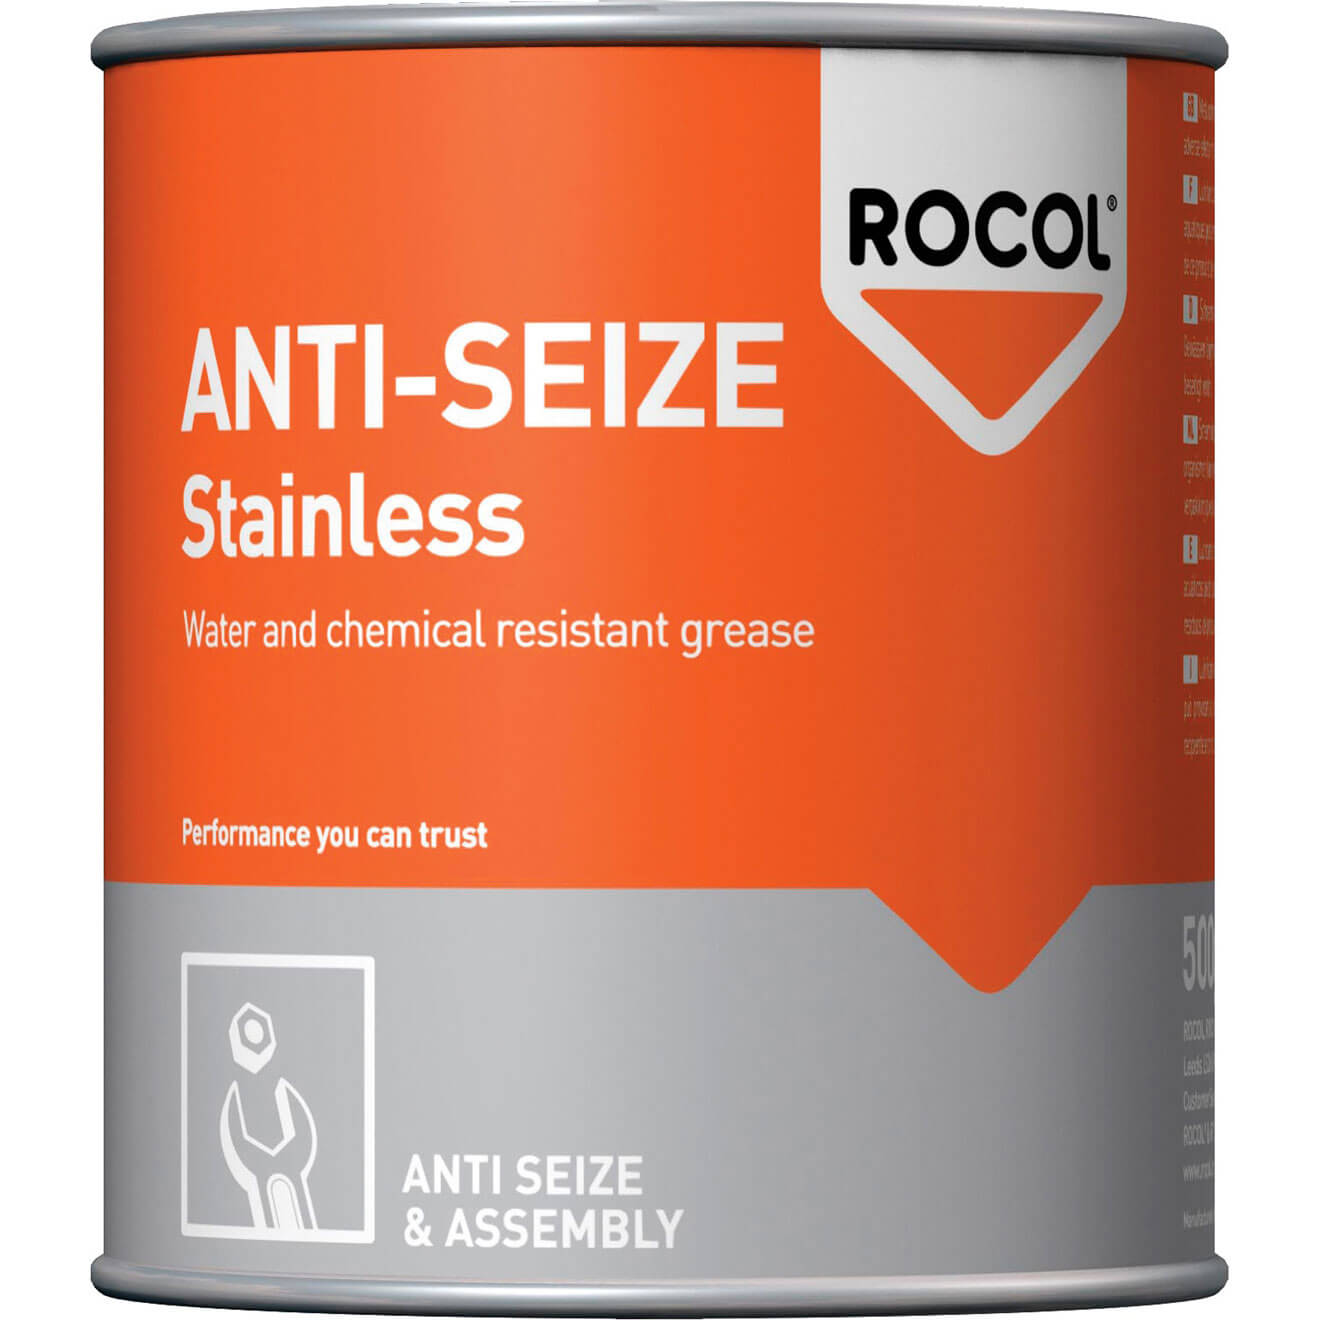 Image of Rocol Anti-Seize Stainless Grease 500g